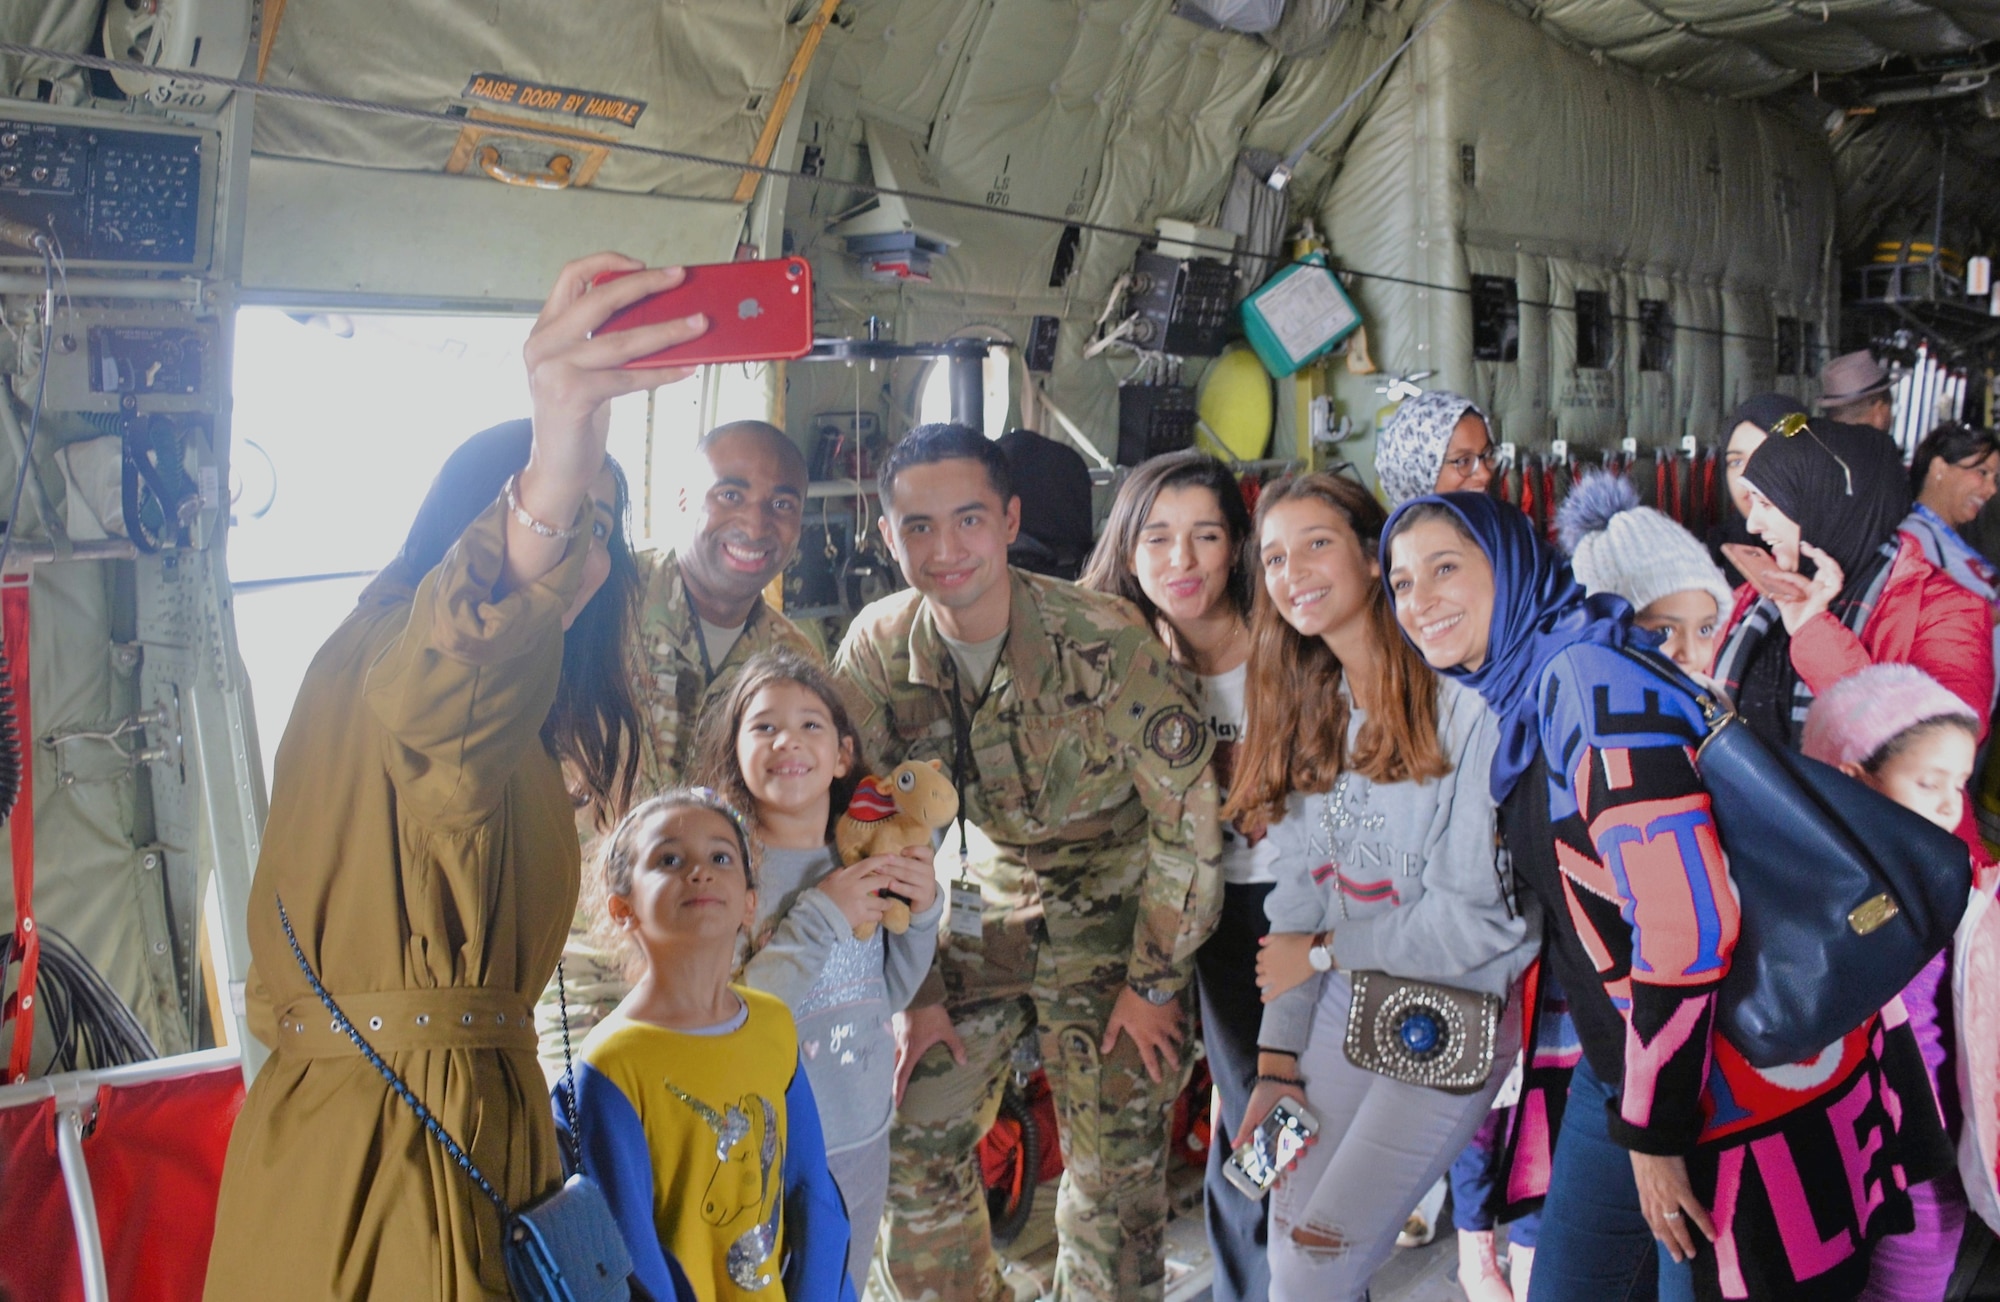 C-130 crewmembers SSgt Mario Linton (left) and A1C Alex Loberg from the 86th Airlift Wing, Ramstein Air Force Base, Germany, pose for a pictures with visitors at the Marrakech Air Show in Marrakech, Morocco. The air show drew hundreds of civilian and military aviation leaders and thousands of public visitors Oct. 24-27 to showcase leadership in aerospace technologies by the U.S., Morocco and other regional partners. Continued U.S participation in the Marrakech Air Show, held every two years since 2008, promotes strong ties with Morocco and demonstrates to large audiences that U.S. industry is producing the types of equipment that is critical to current and future military operations.